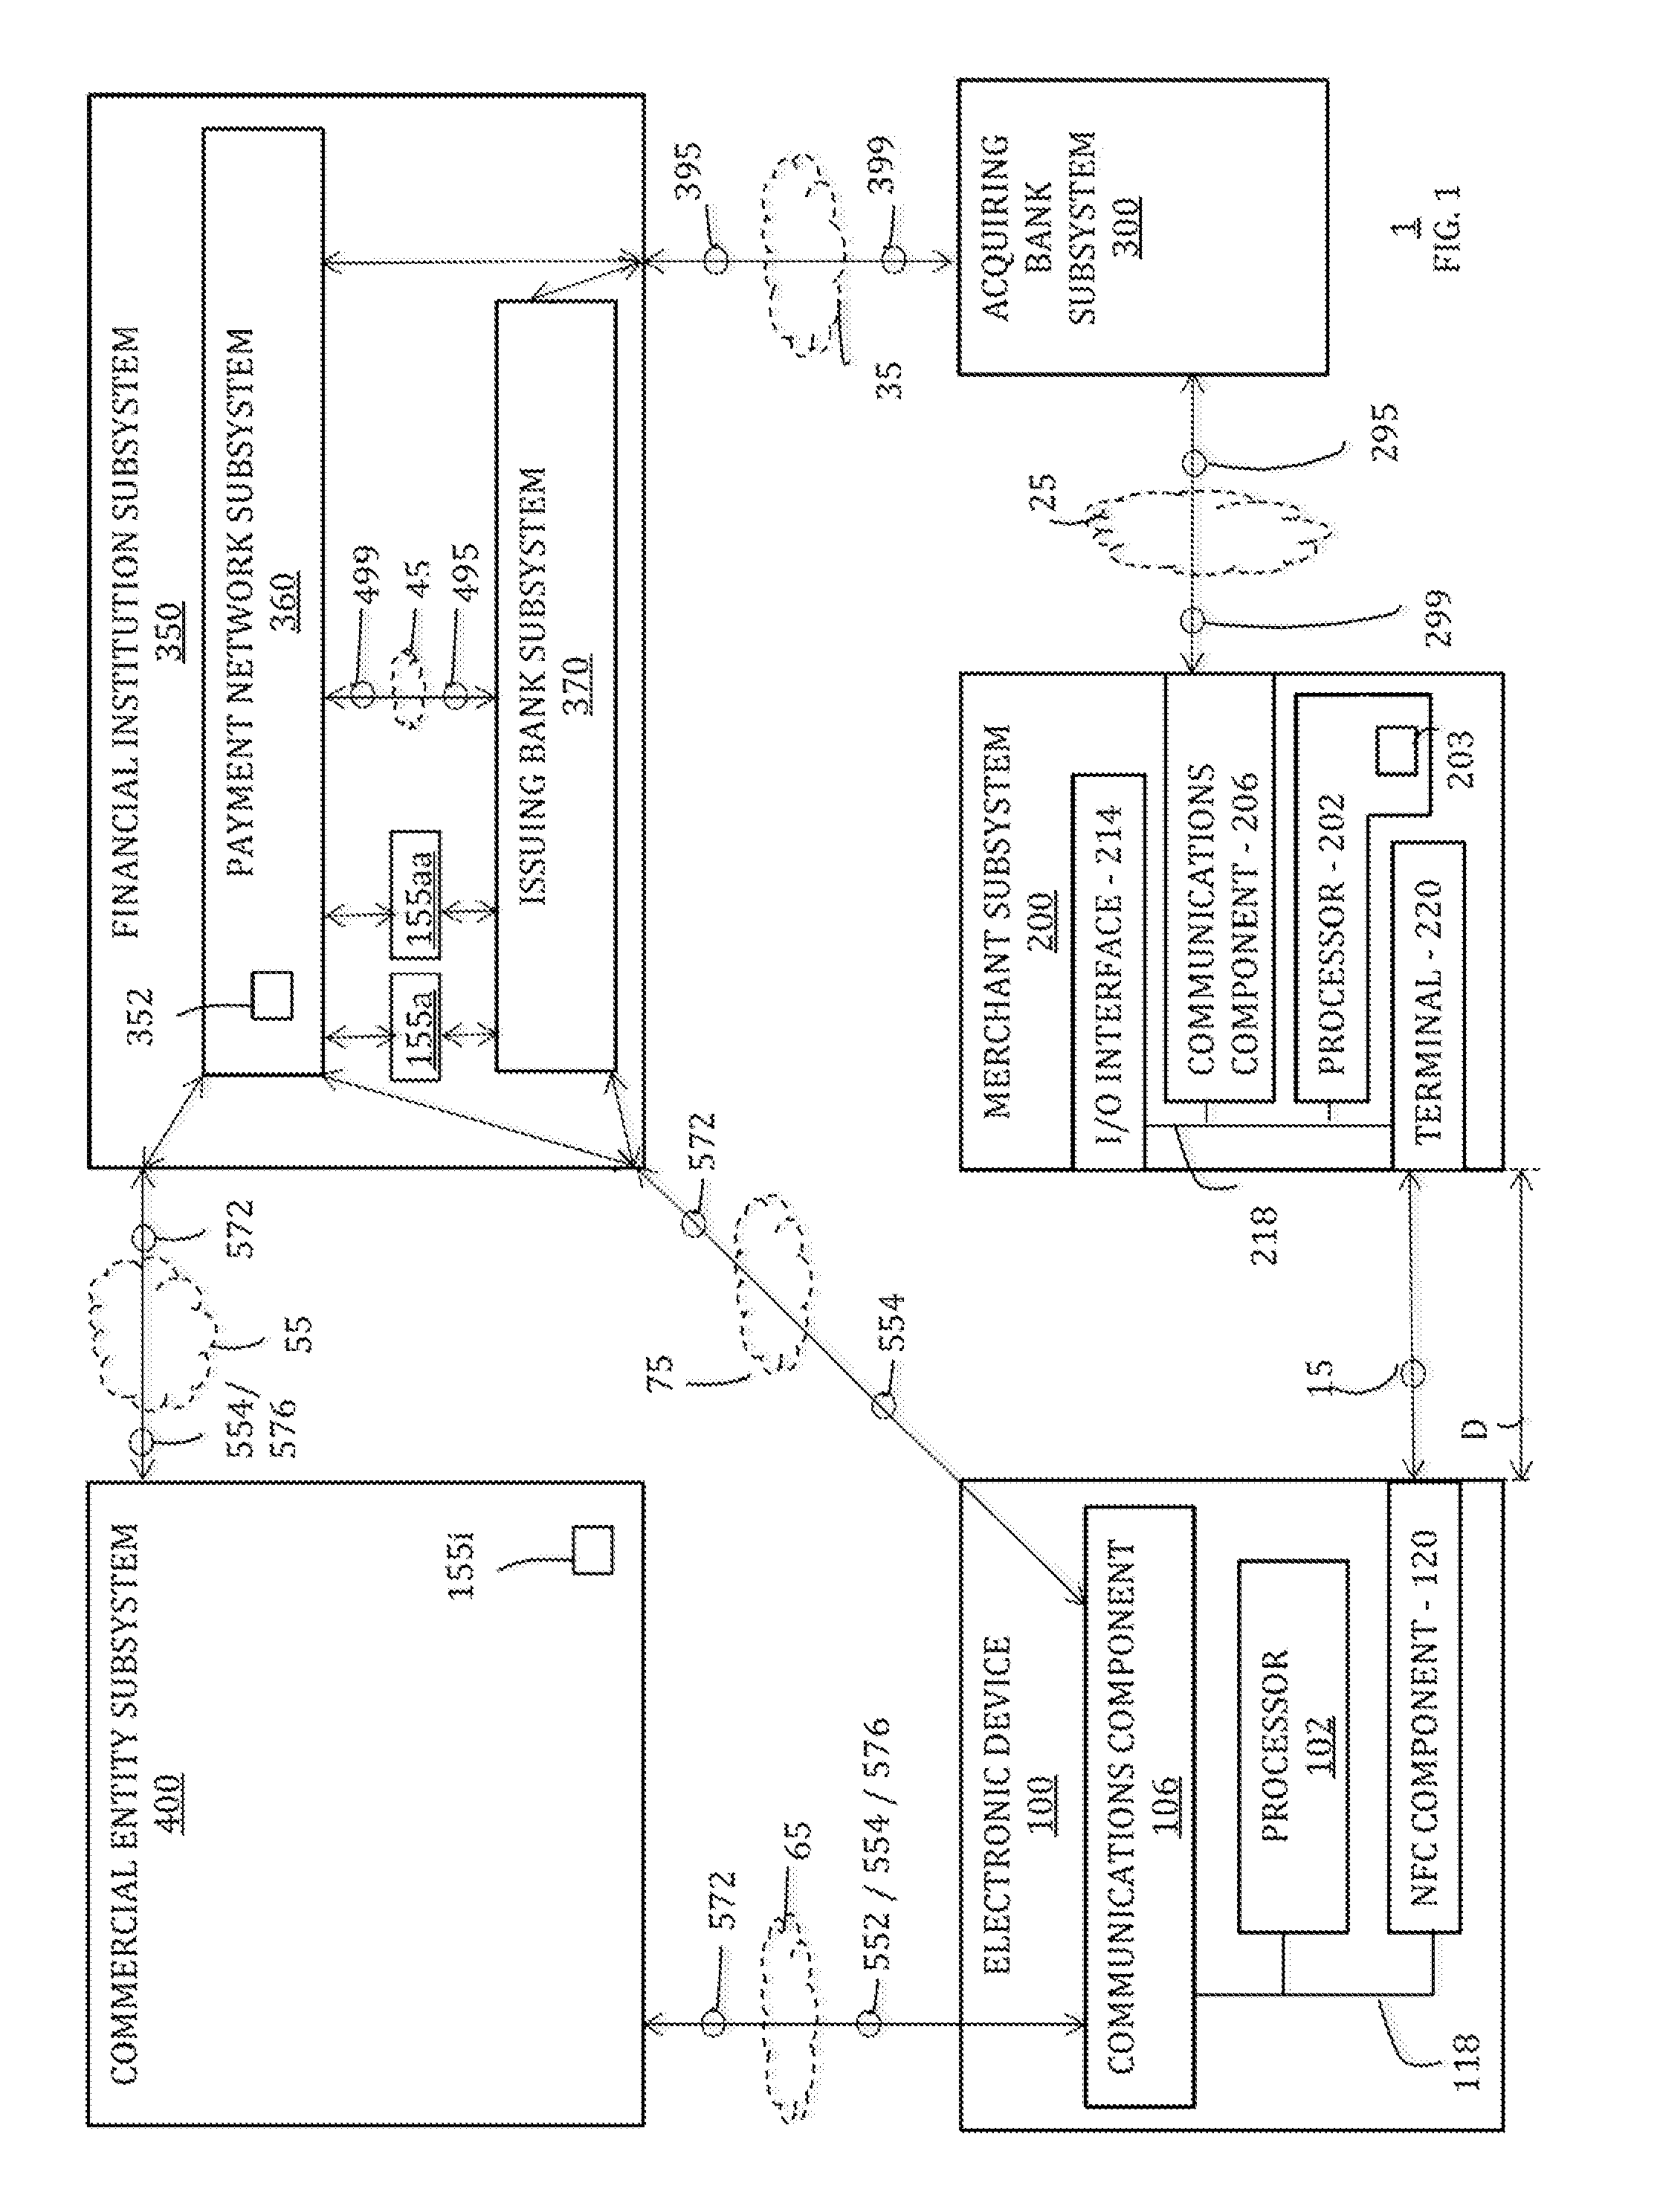 Deletion of credentials from an electronic device